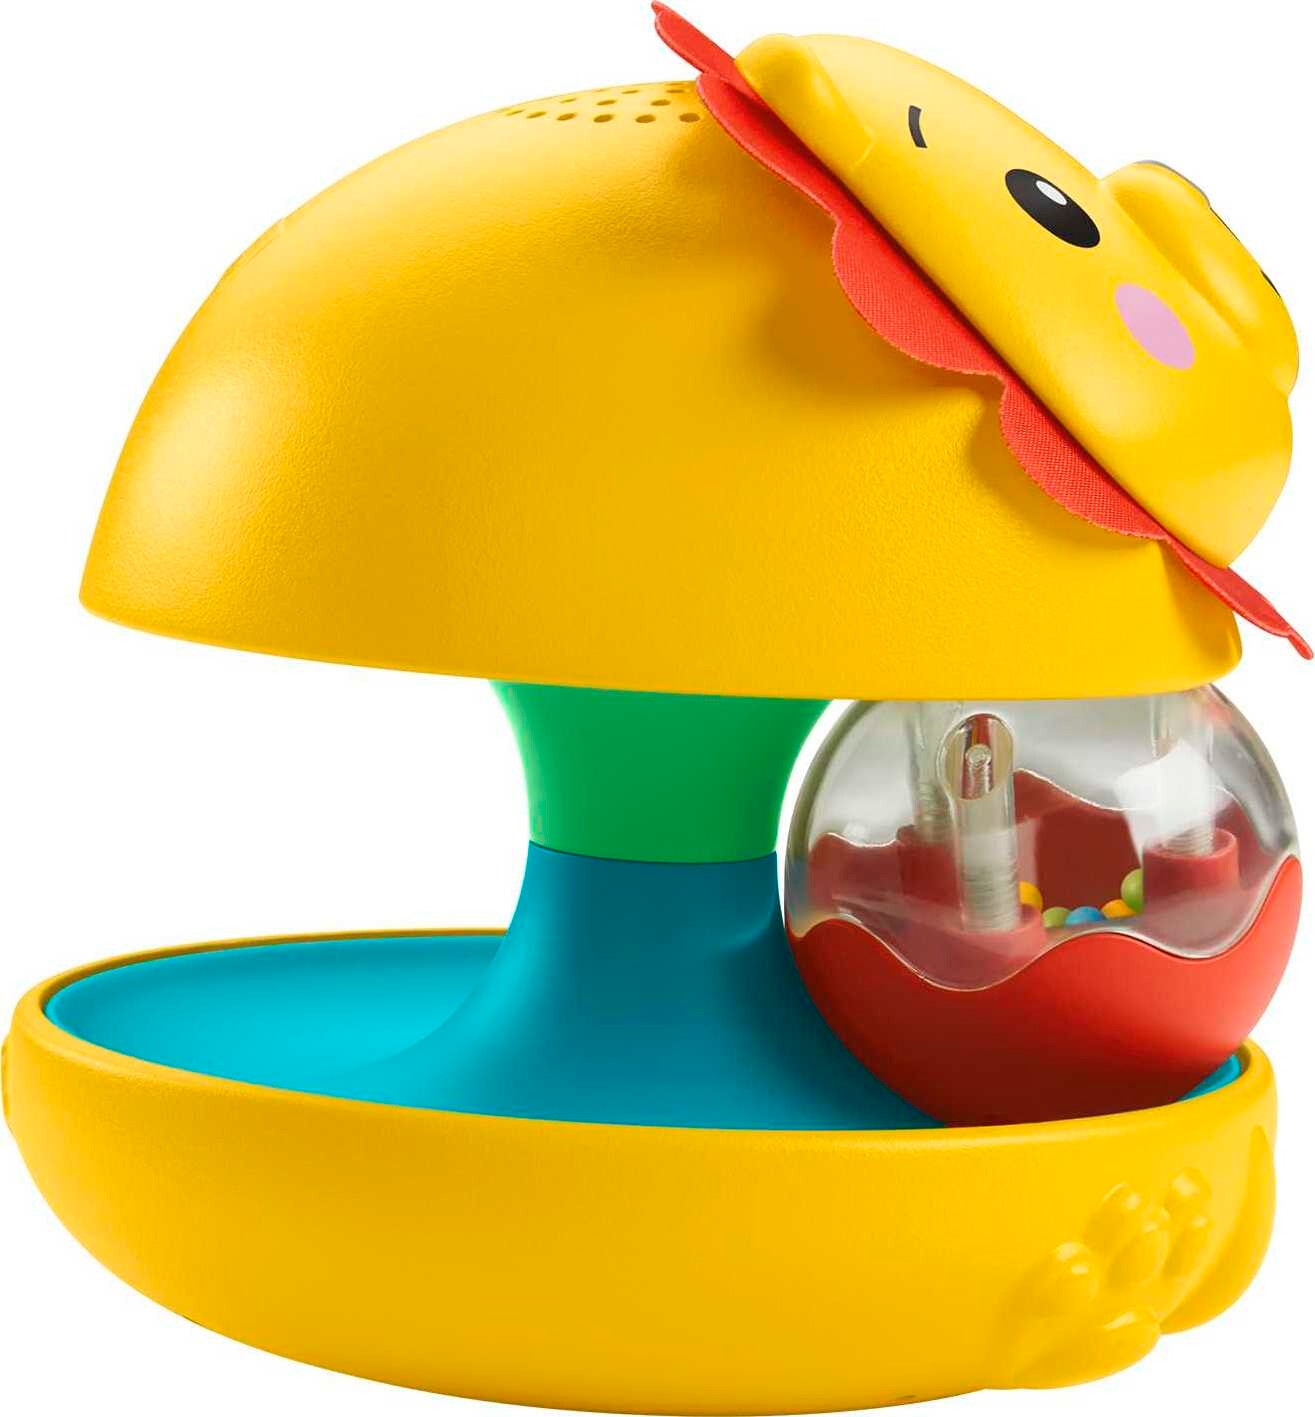 Bebe Fuerte Stack & Count Kettlebell Activity Toy – Baby Toy for